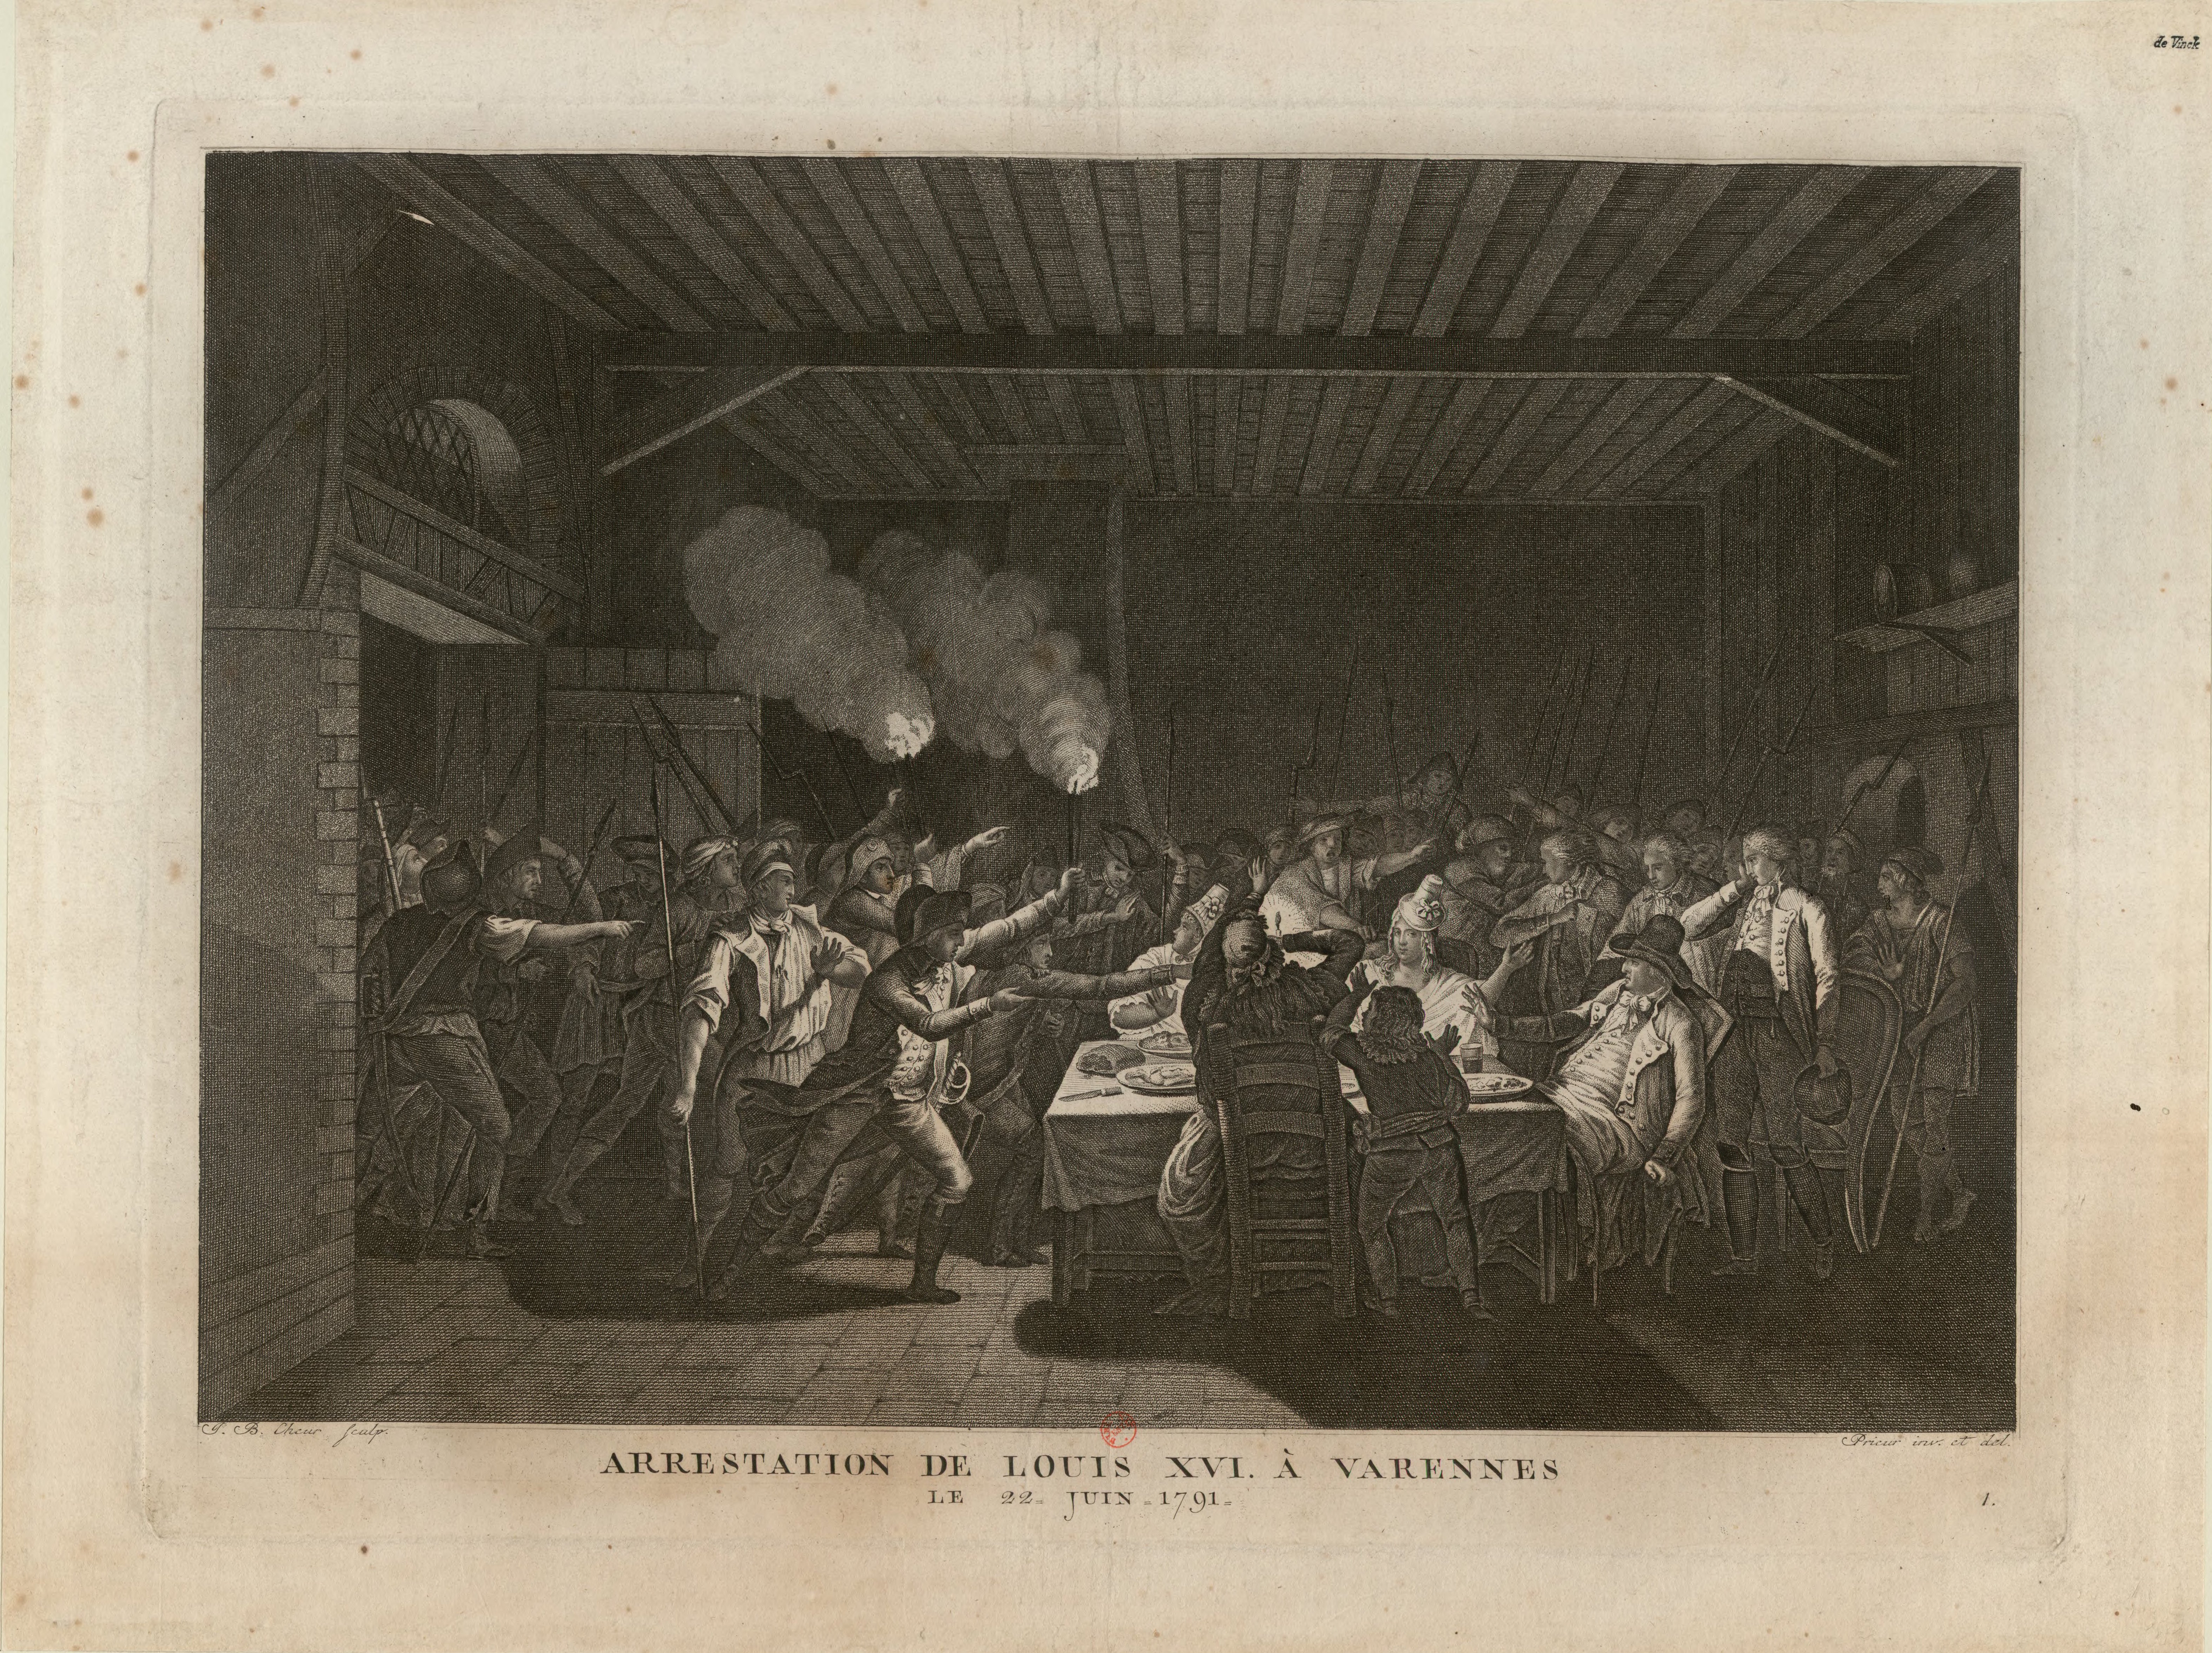 Print of angry crowd of revolutionaries